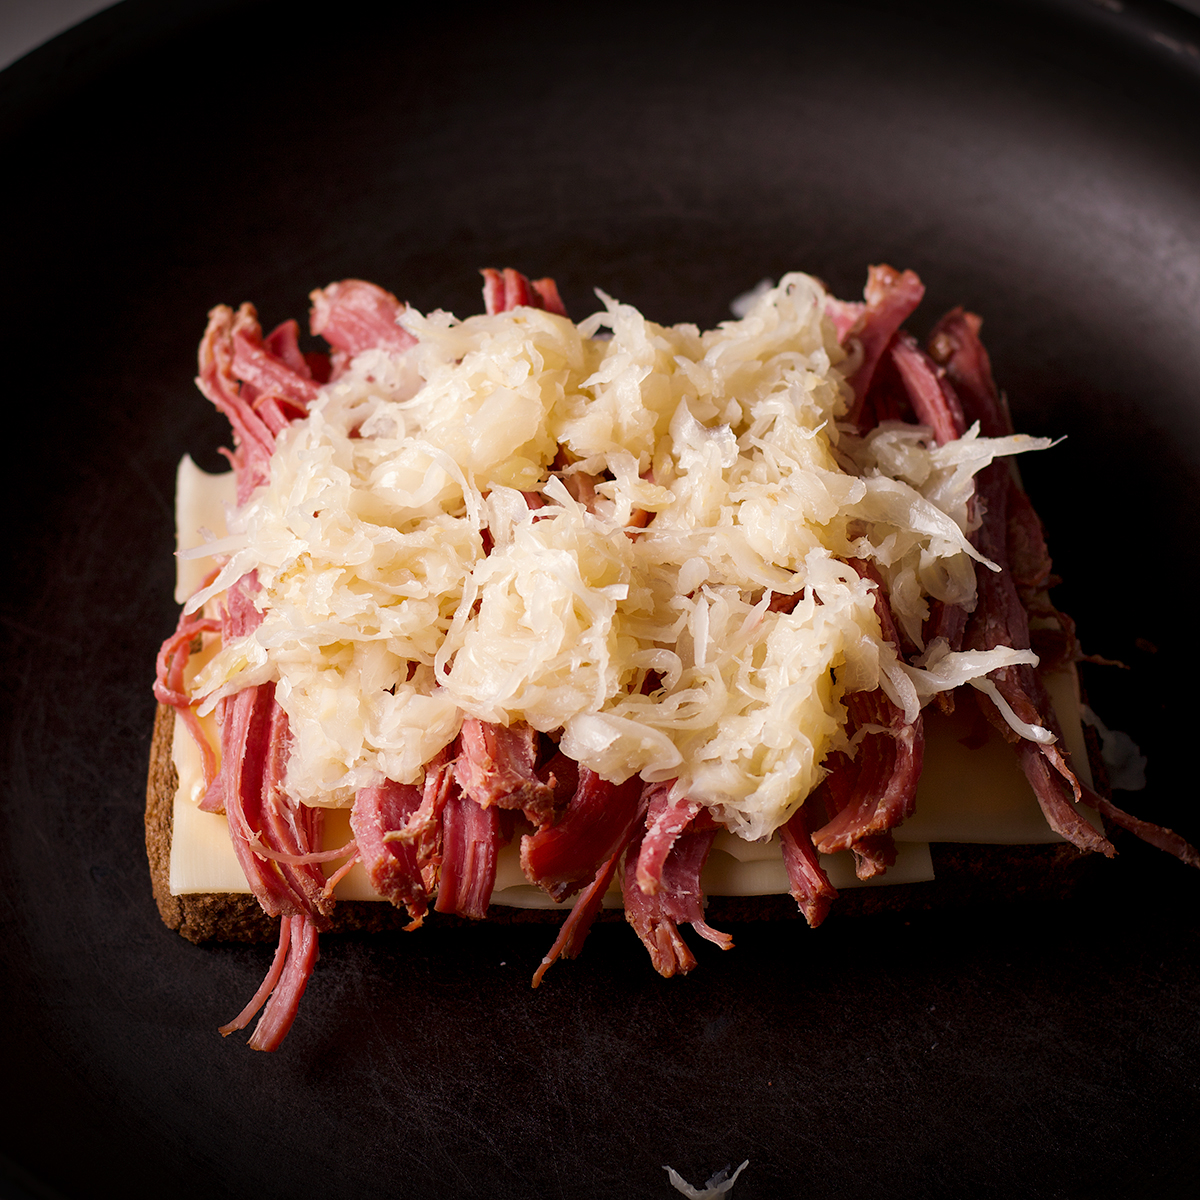 A piece of Rye bread spread with Russian dressing and layered with Swiss cheese and corned beef and Sauerkraut in a skillet.